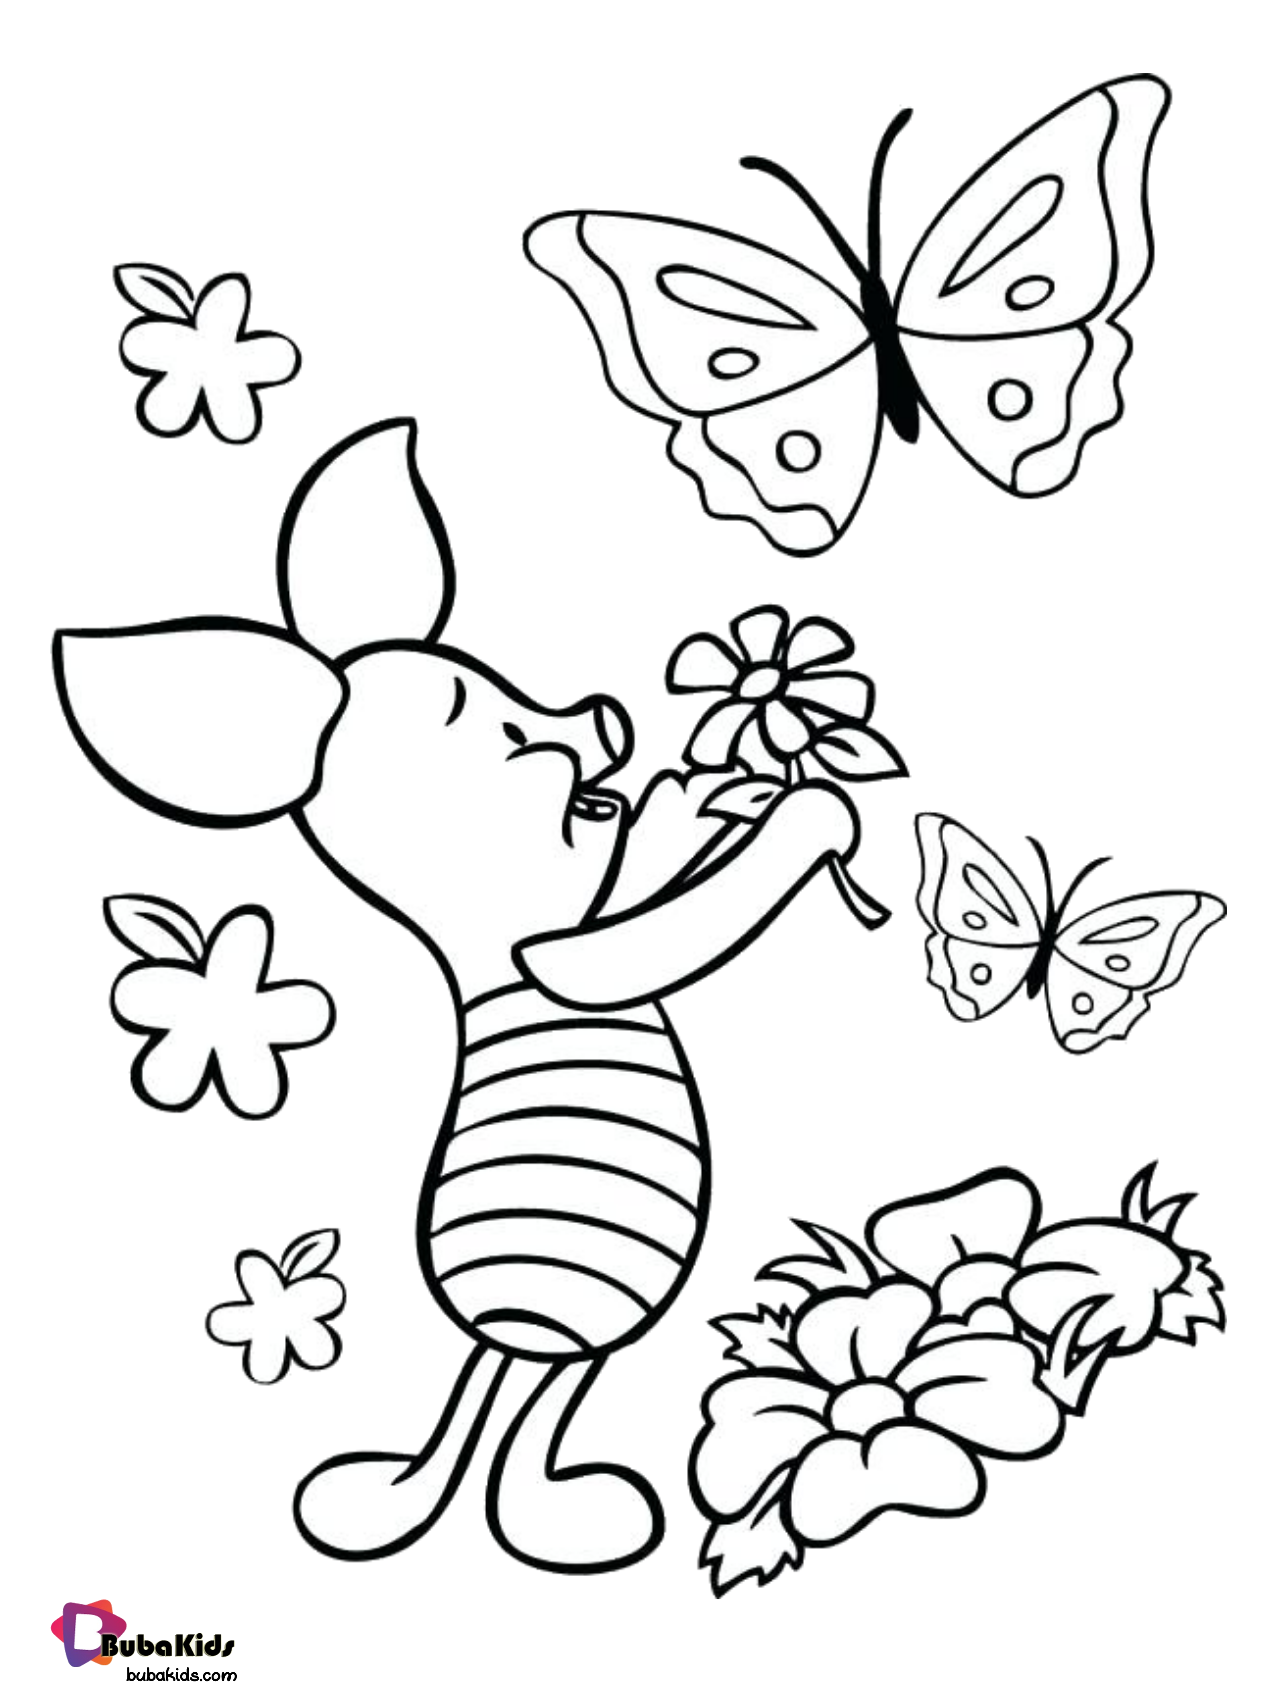 Piglet and butterflies printable coloring page.